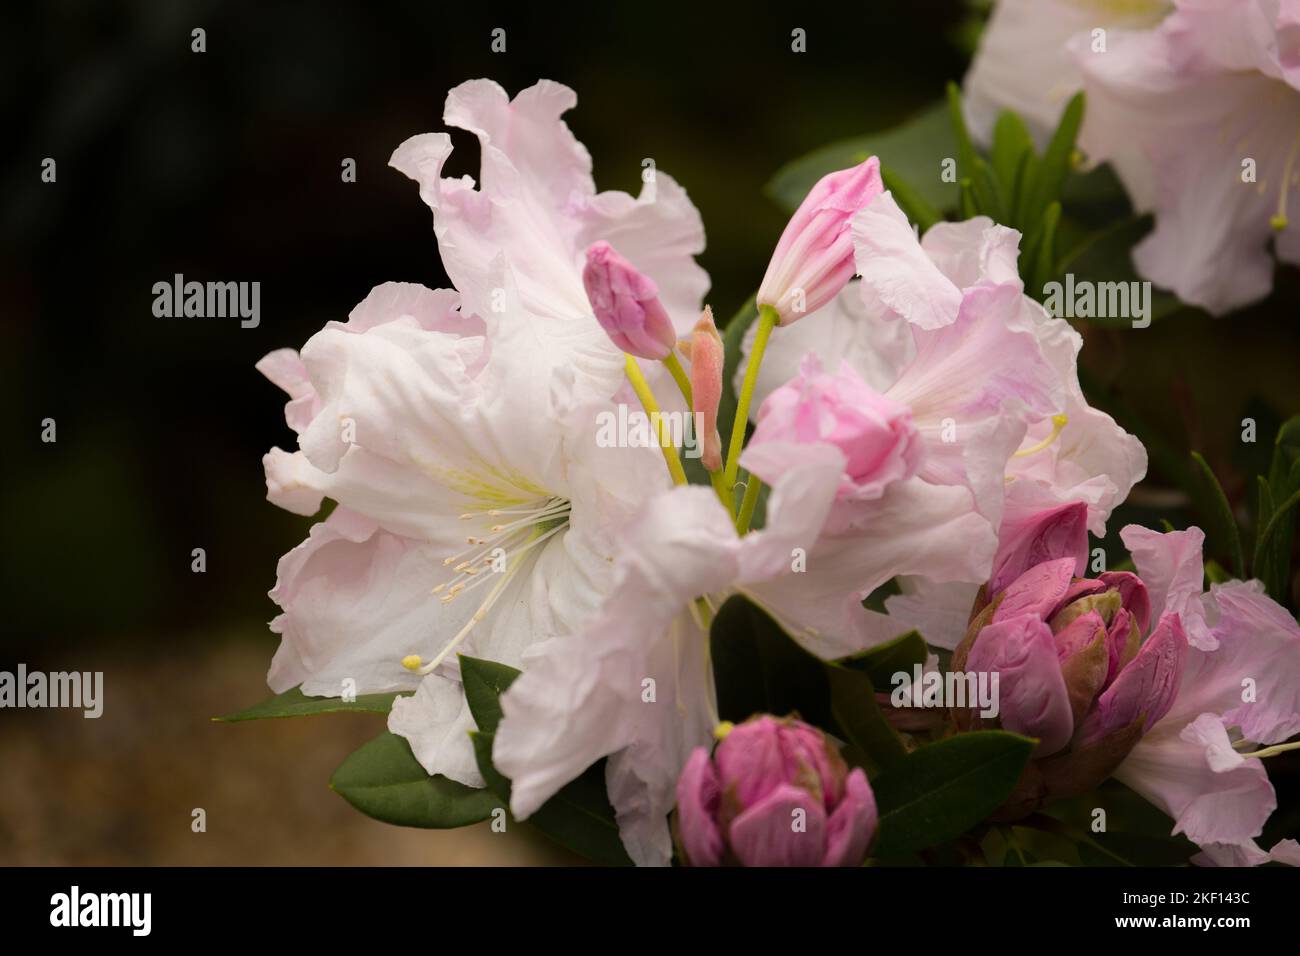 Beautiful pale pink Rhododendron blossoms. The core of the flowers has a delicate, spotted yellow pattern, the feather dusters are white. Stock Photo